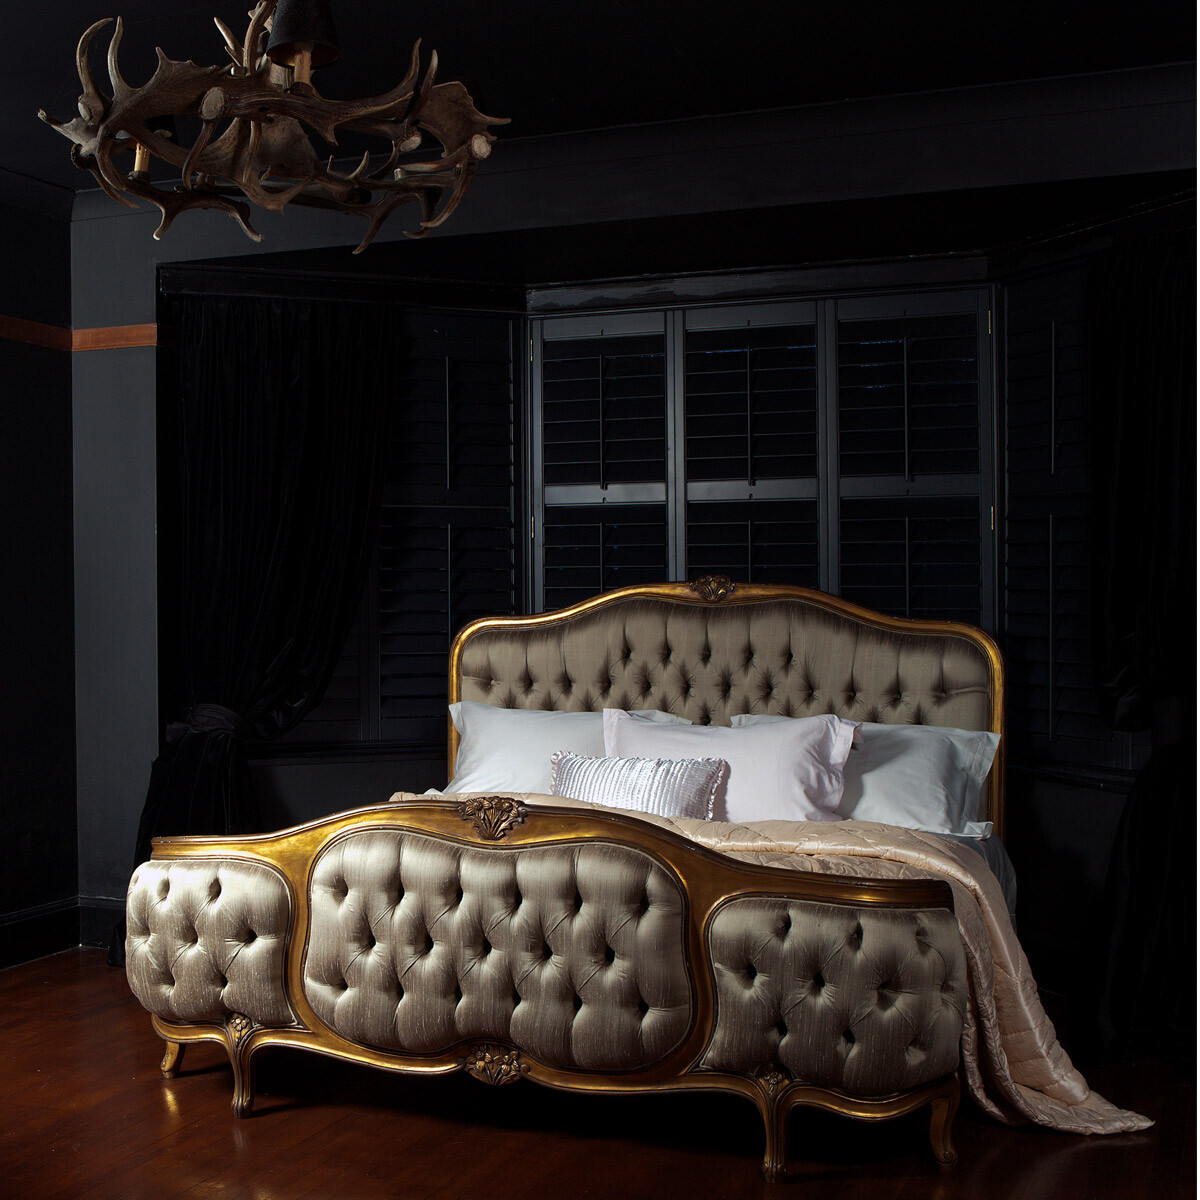 French beds - Versailles Curved Luxury - The French Bedroom Company - www.homeworlddesign.com